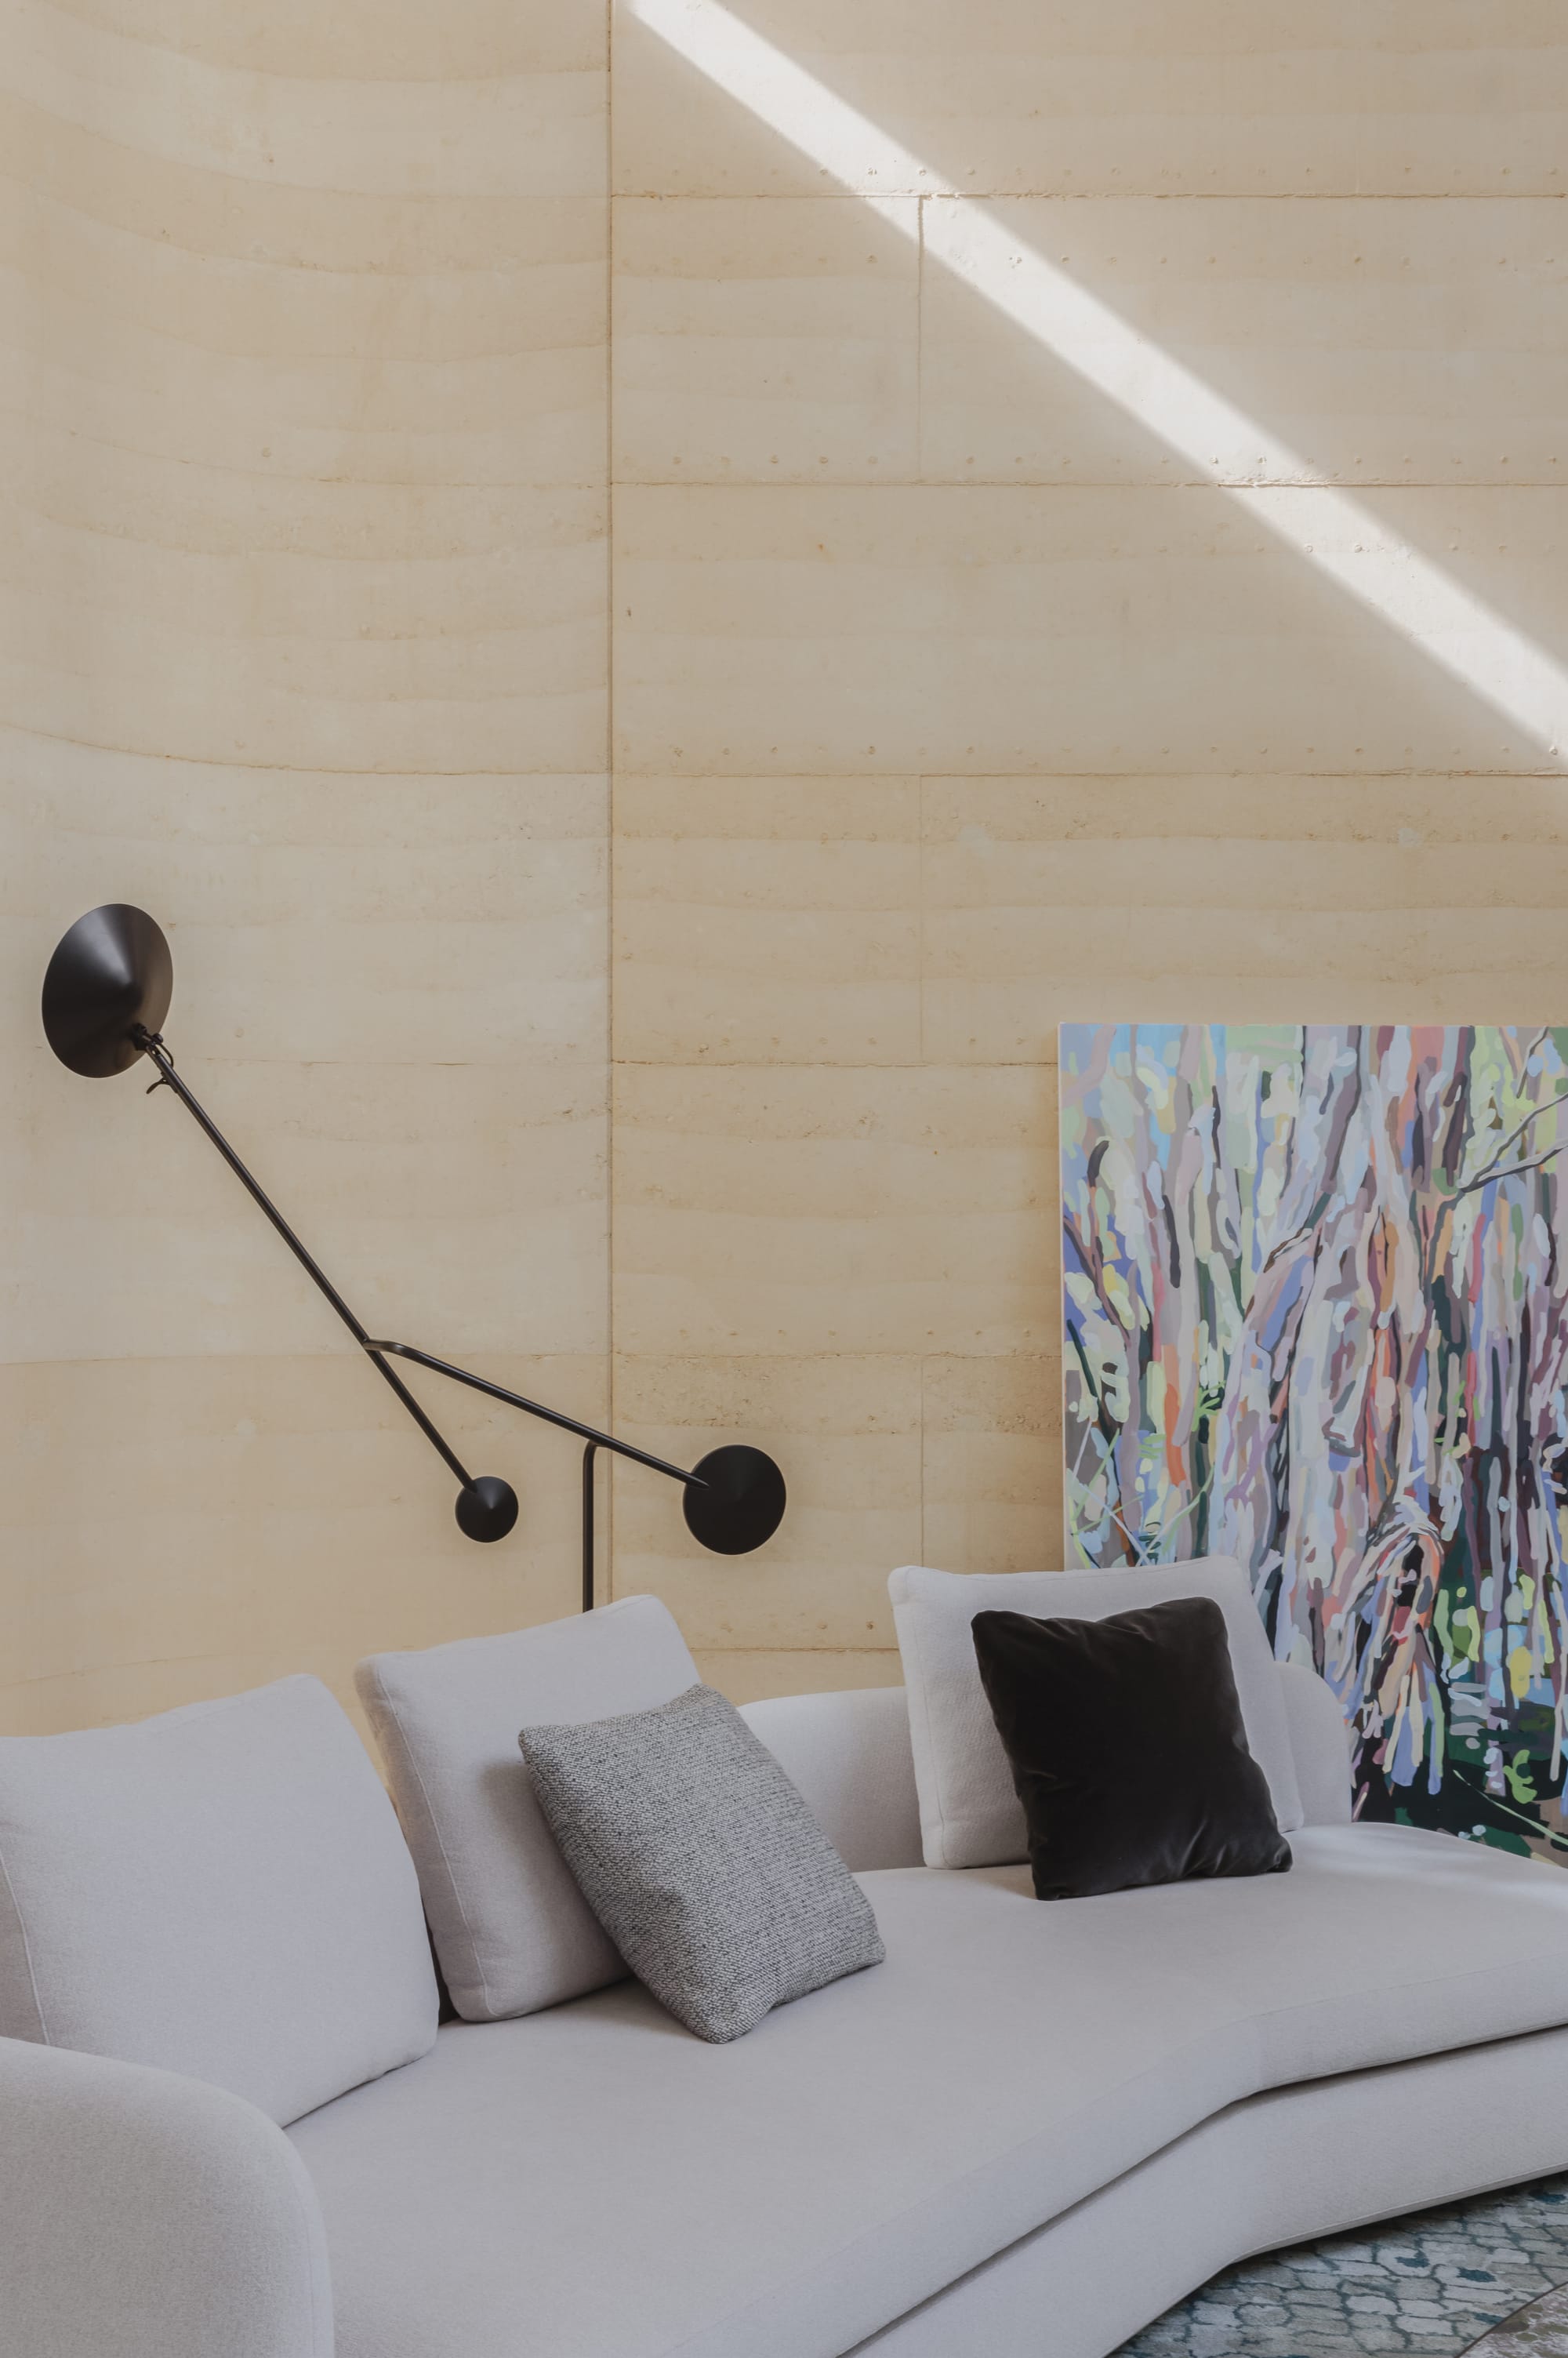 Kenneth Street by Design Studio Group showing the rammed earth wall in the living room and the sofa in the foreground